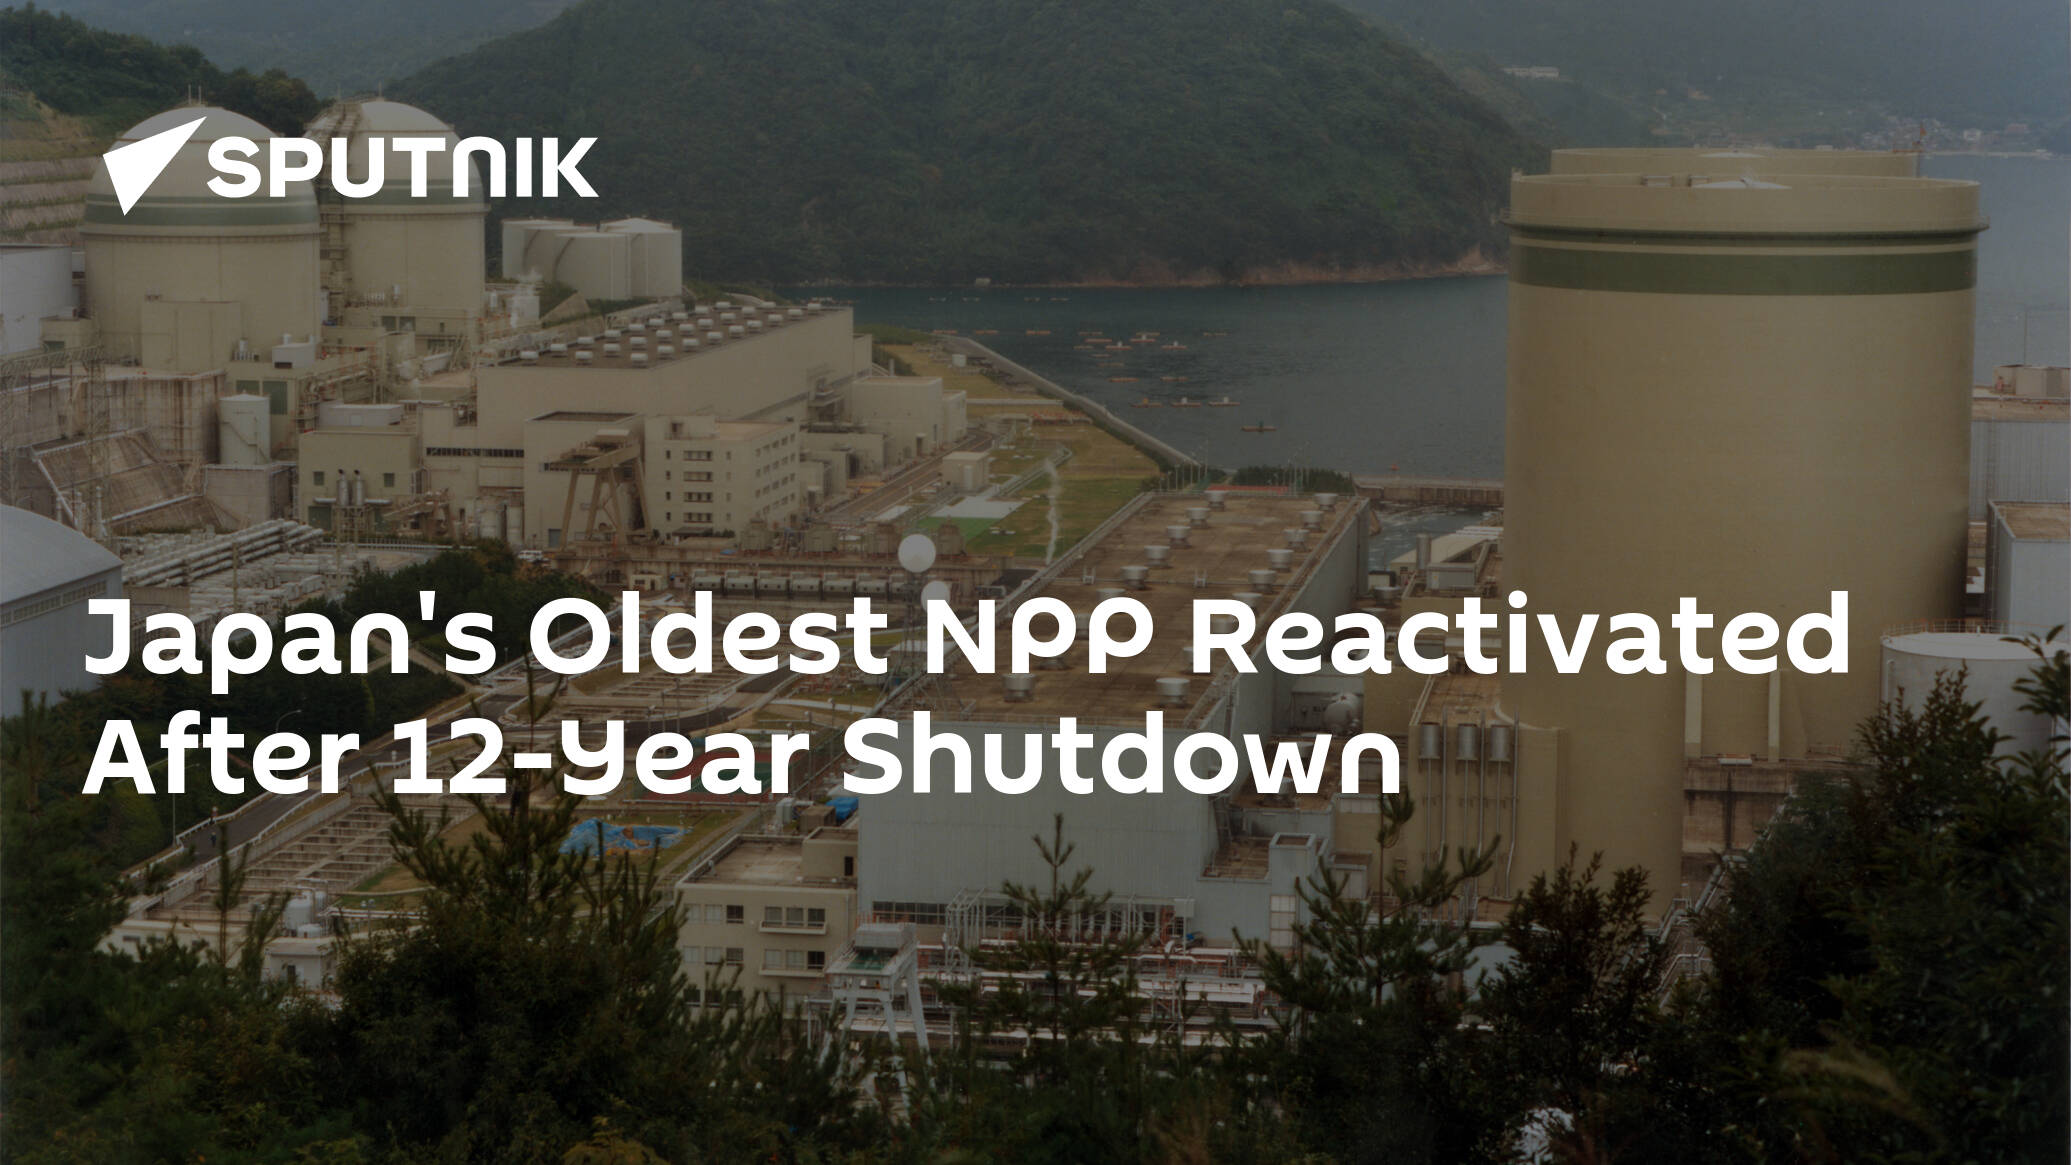 Japan's Oldest NPP Reactivated After 12-Year Shutdown